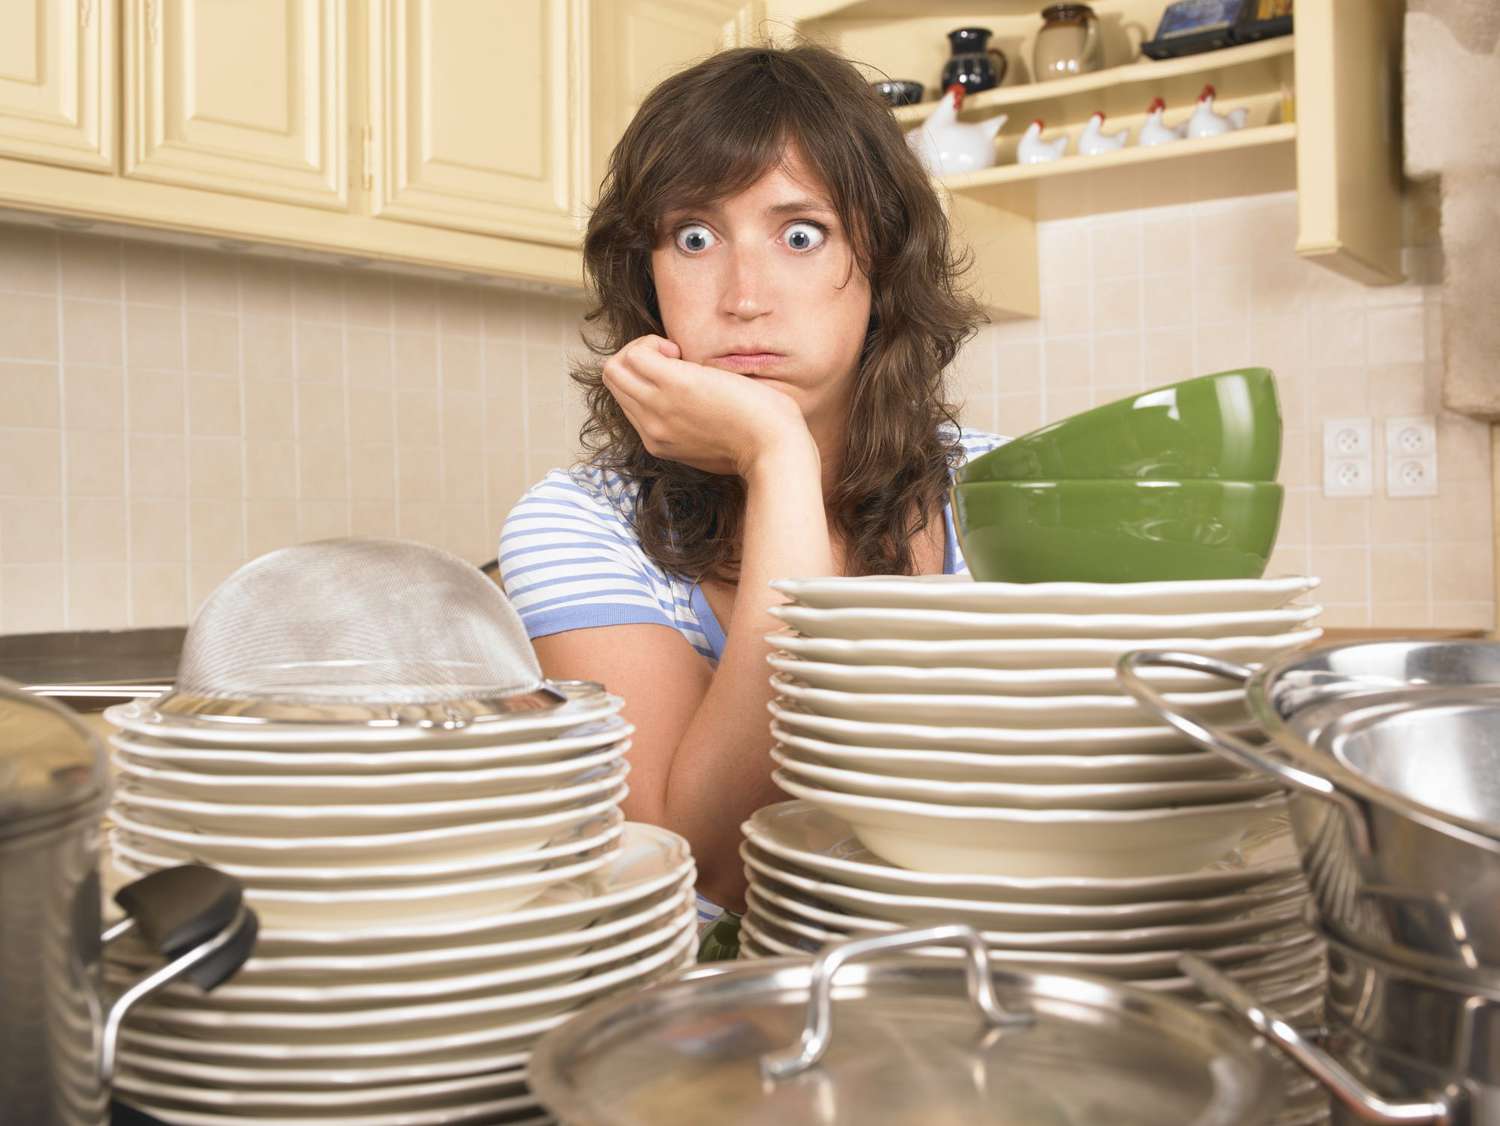 Woman with pile of plates and dishes